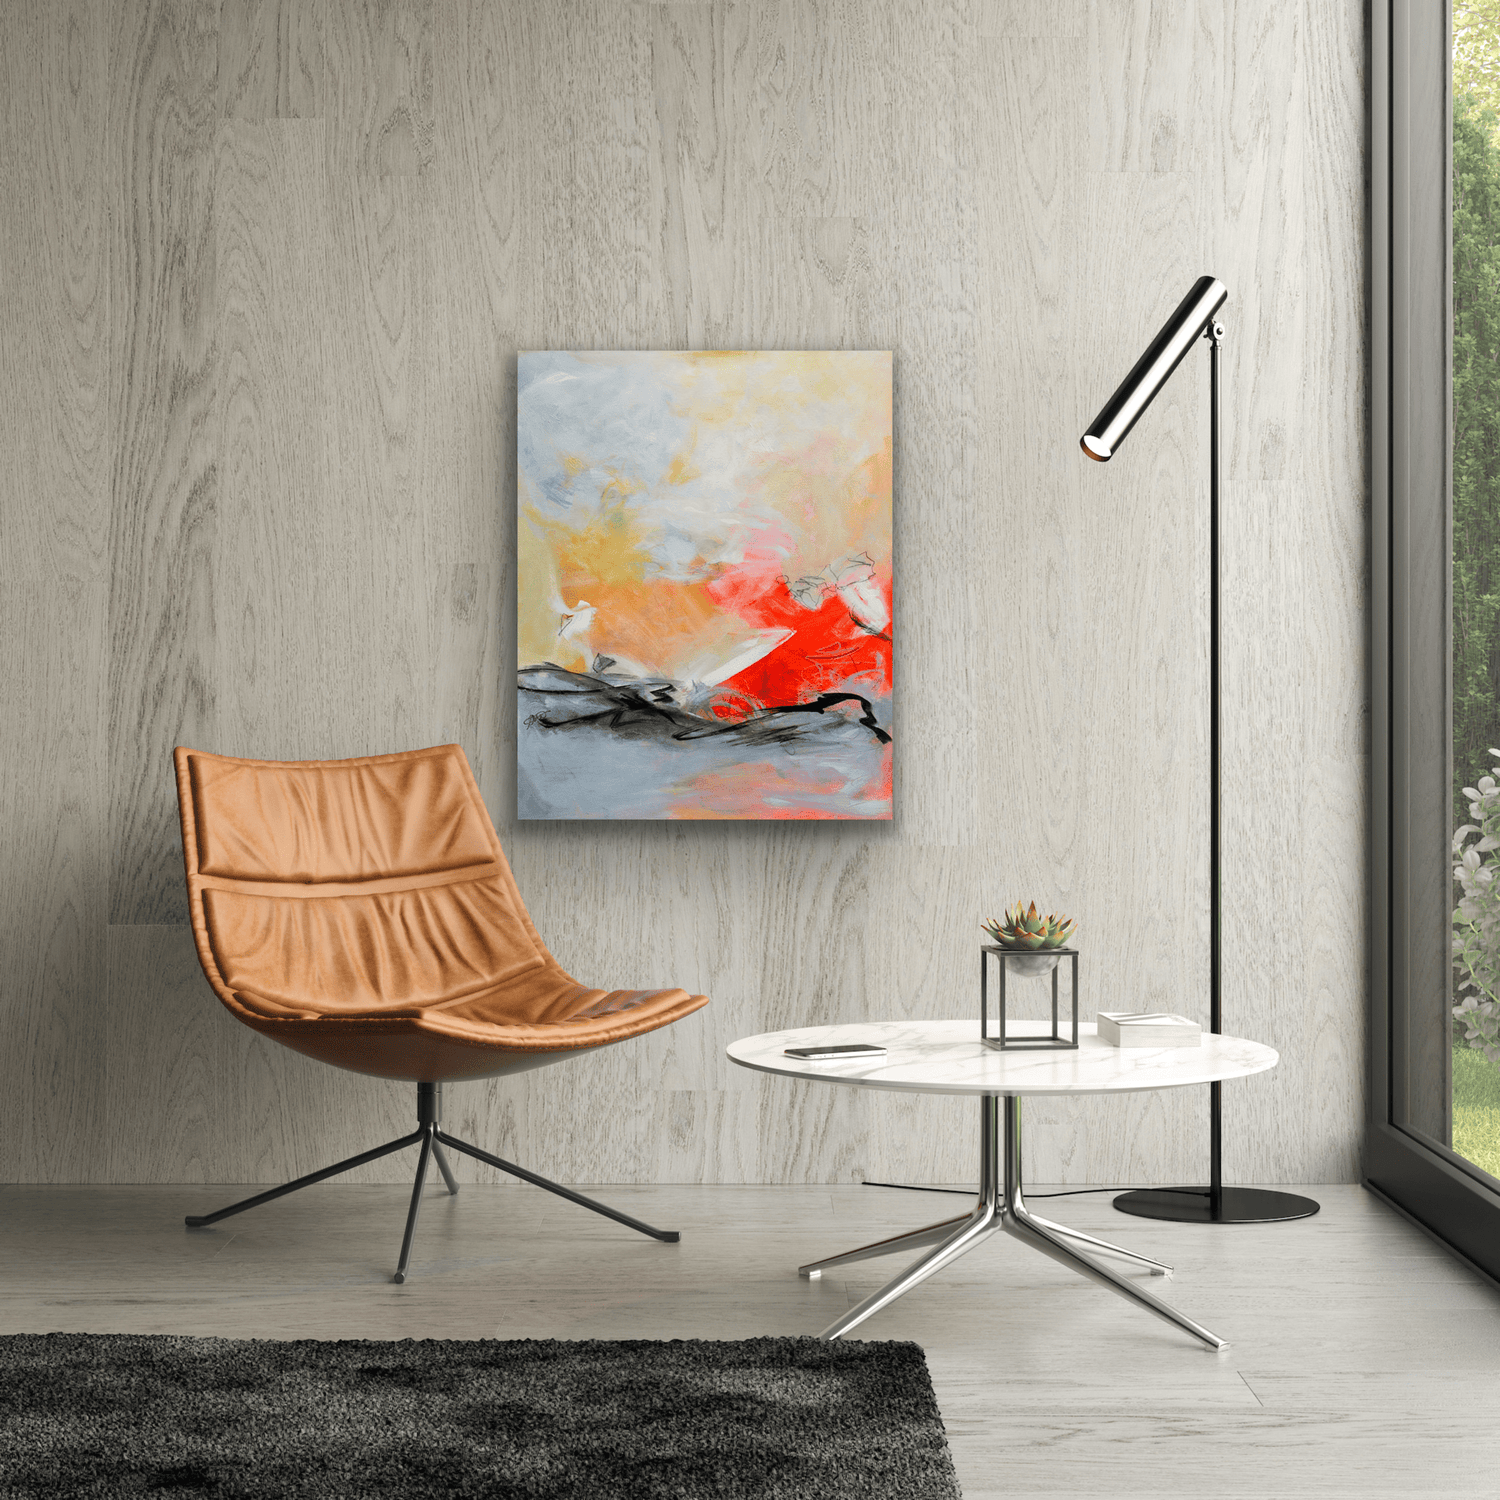 This stunning artwork comes in three different canvas print sizes.